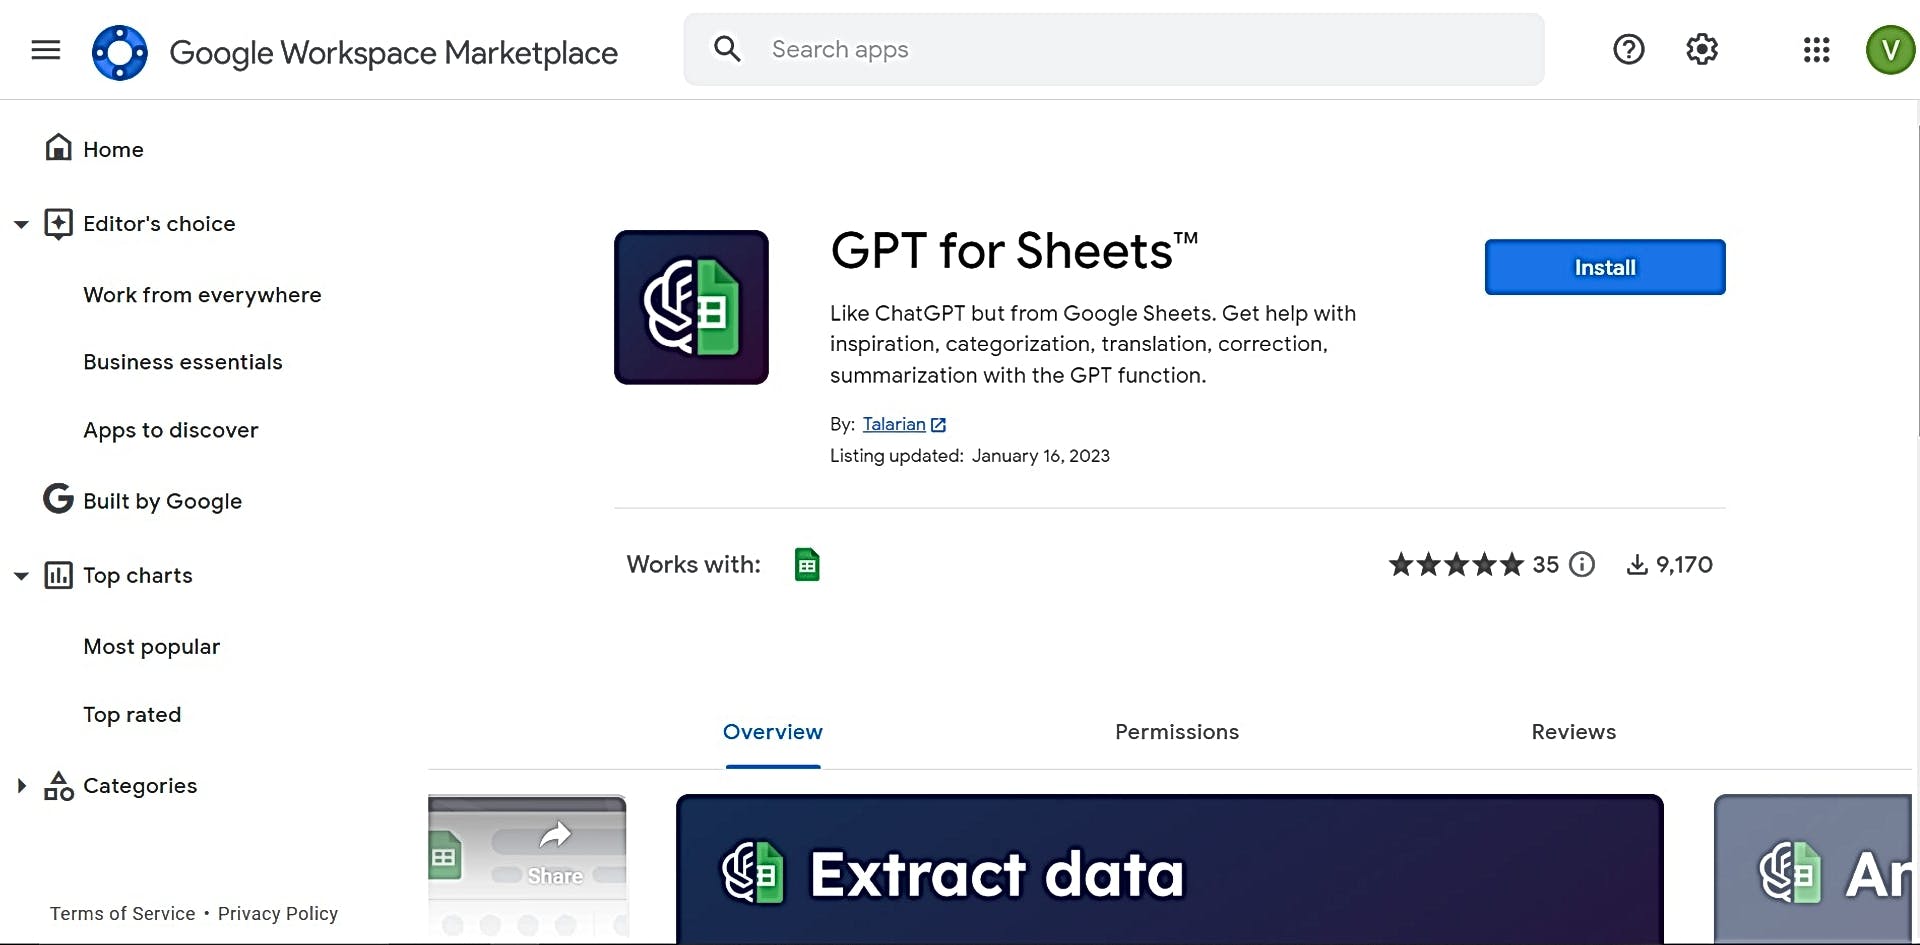 GPT for Sheets featured